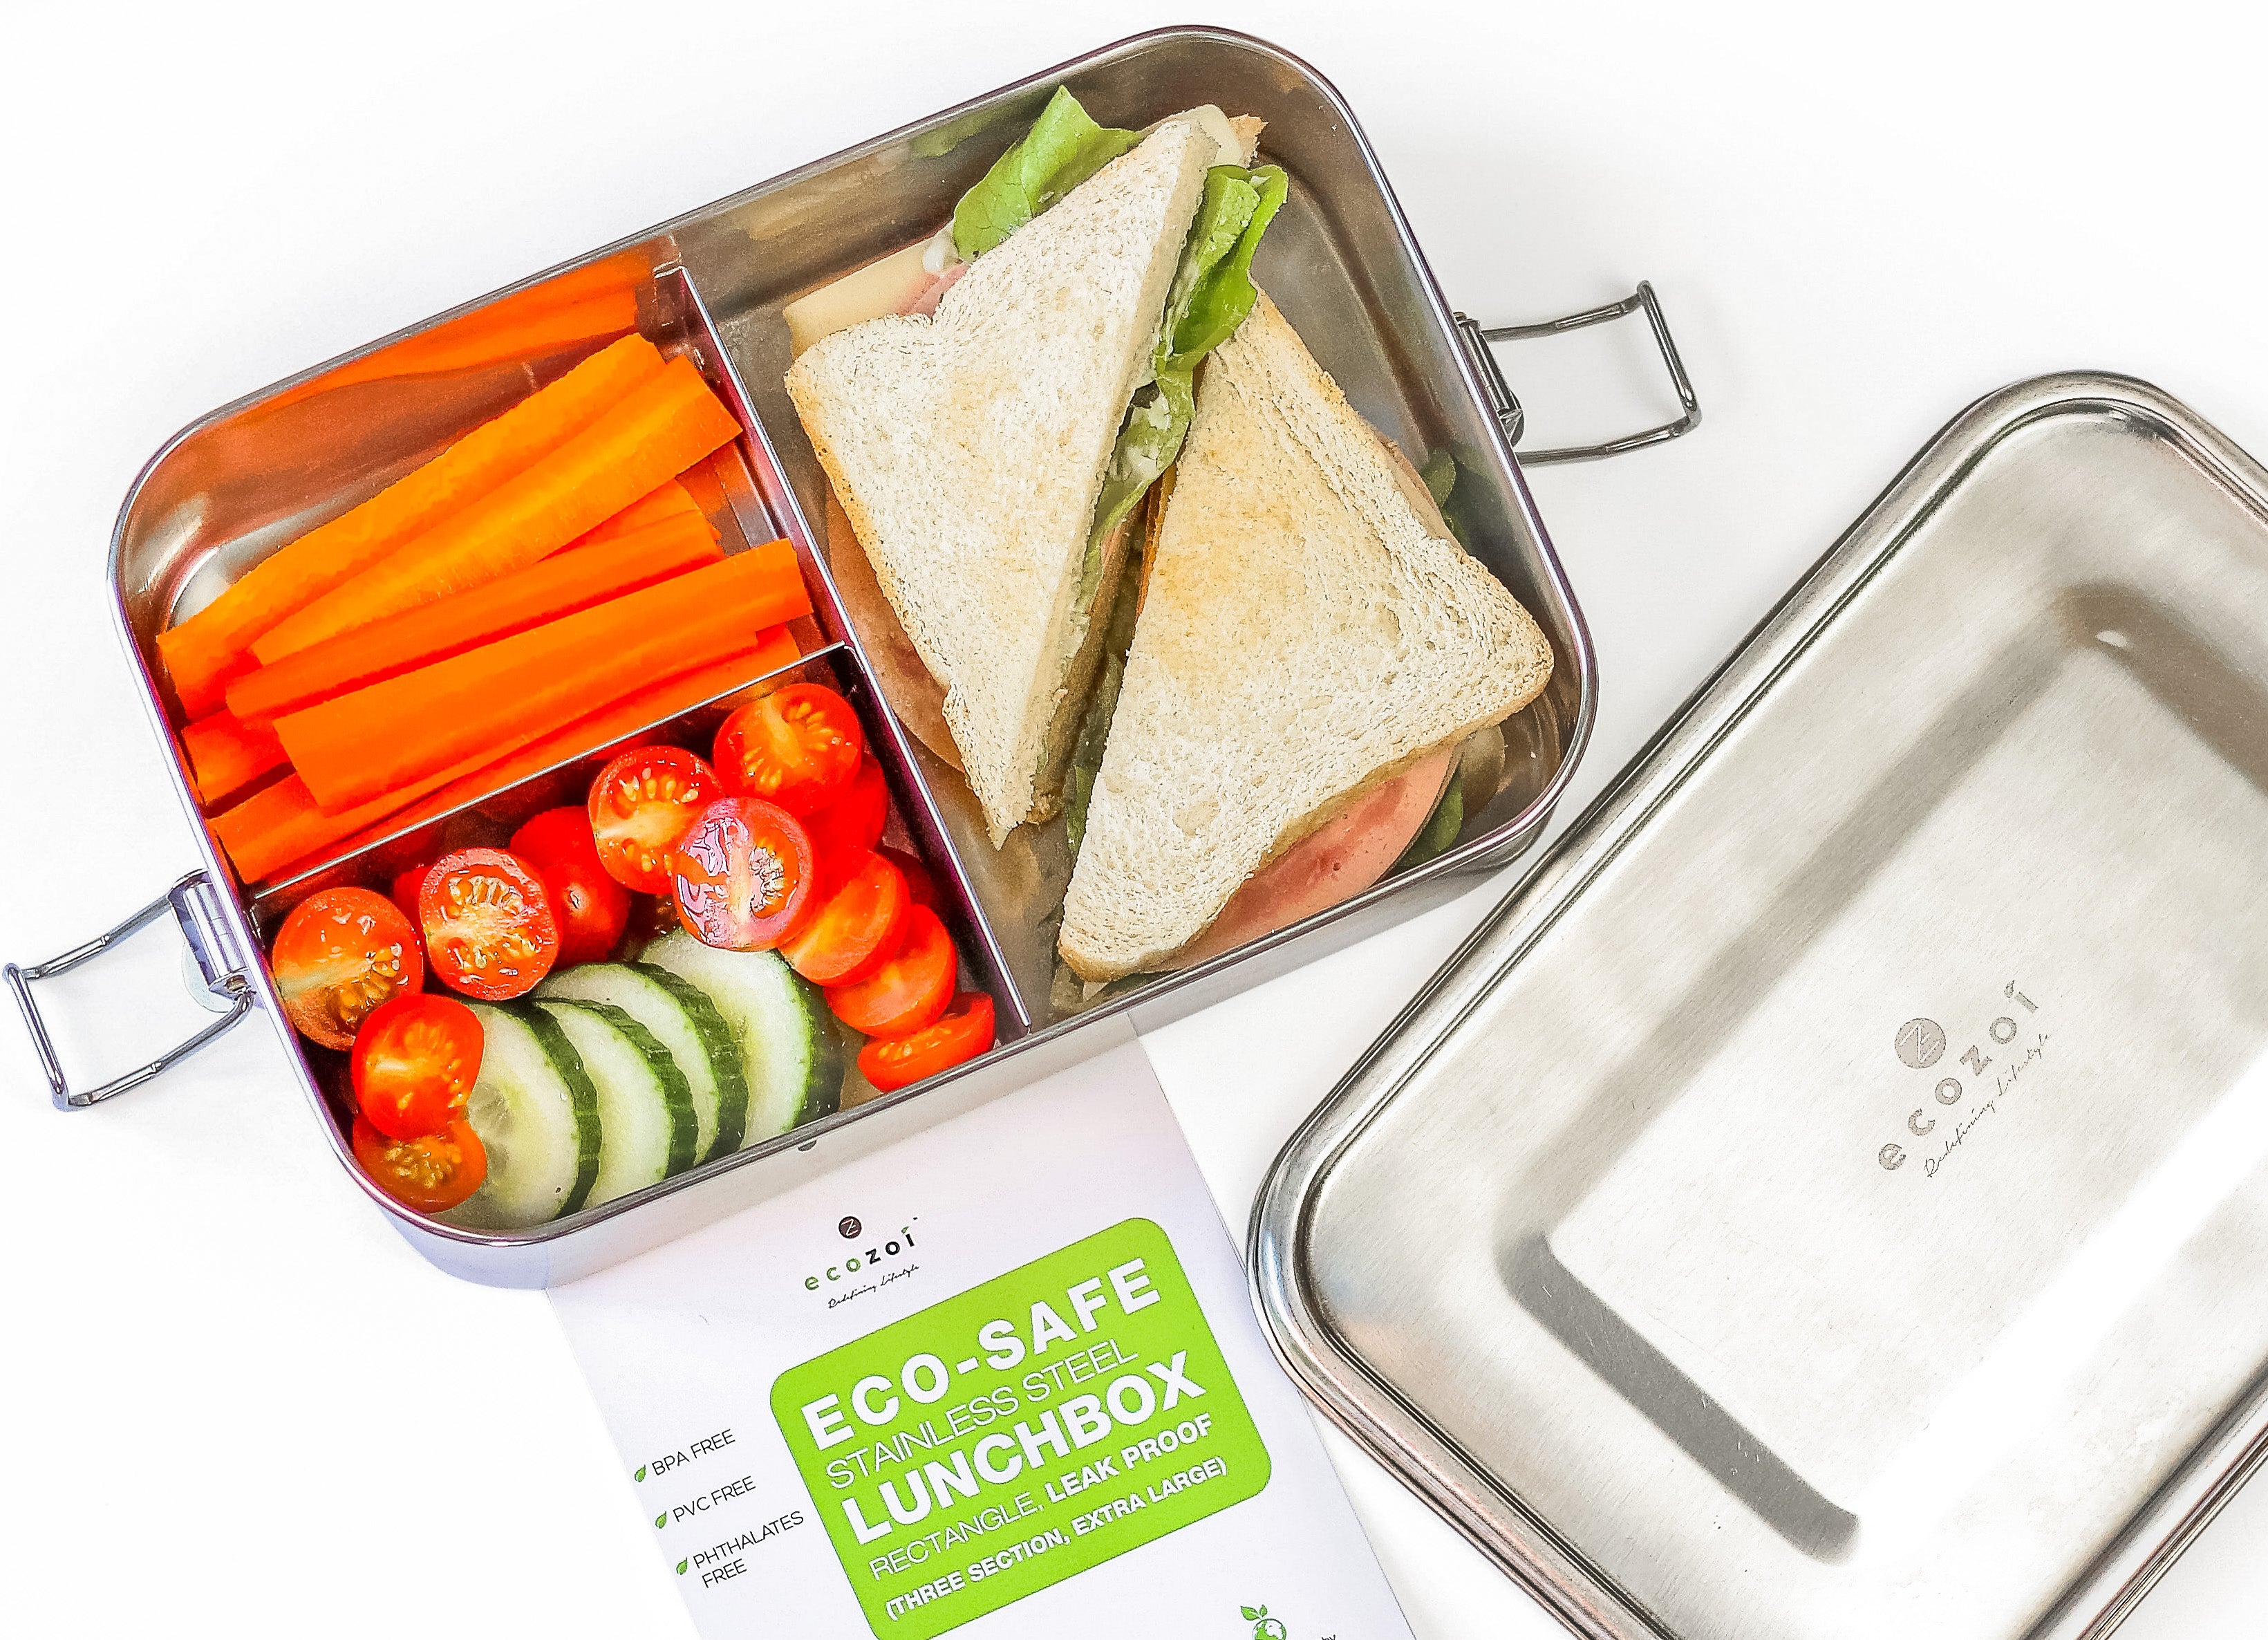 STAINLESS STEEL LUNCH BOX LARGE